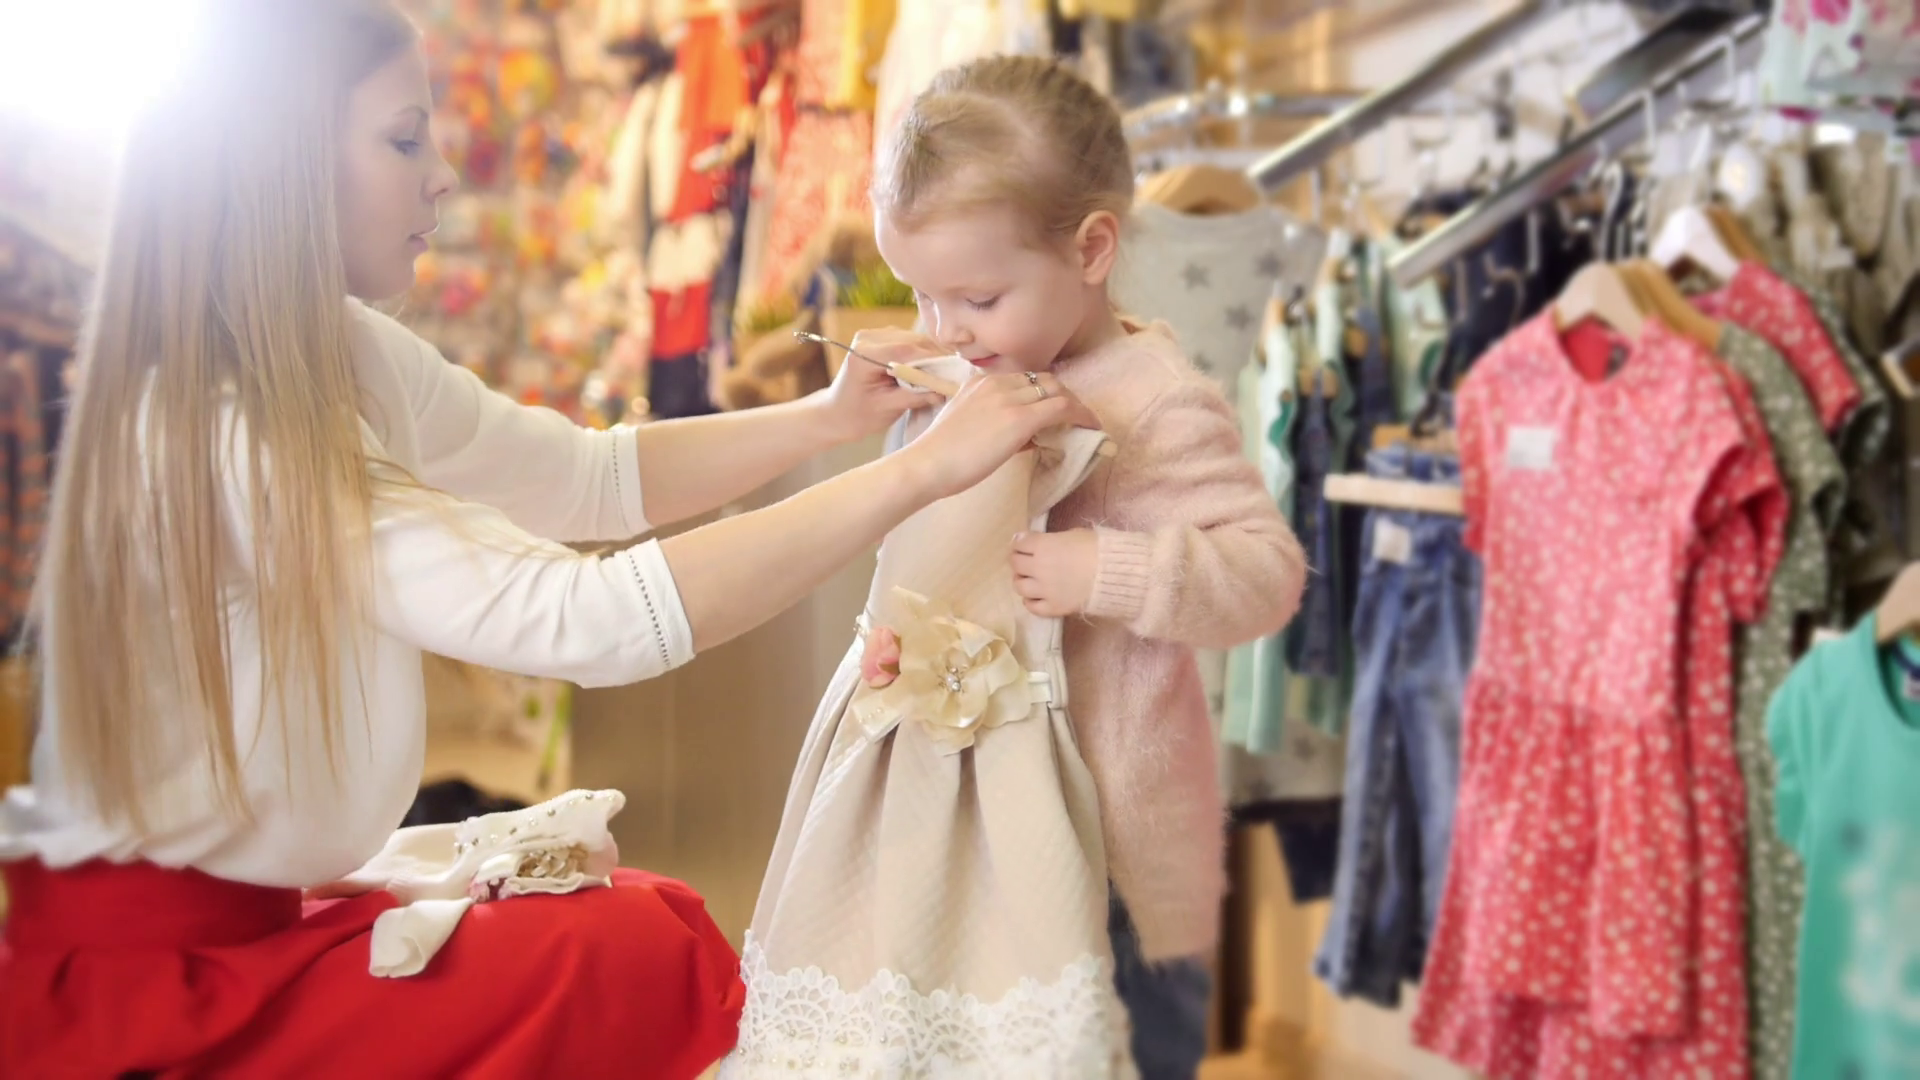 Shopping For Kids Little Girl With Mommy Buying Dress In Store Of Kids Clothes Stock Video Footage 00:06 SBV 315031354